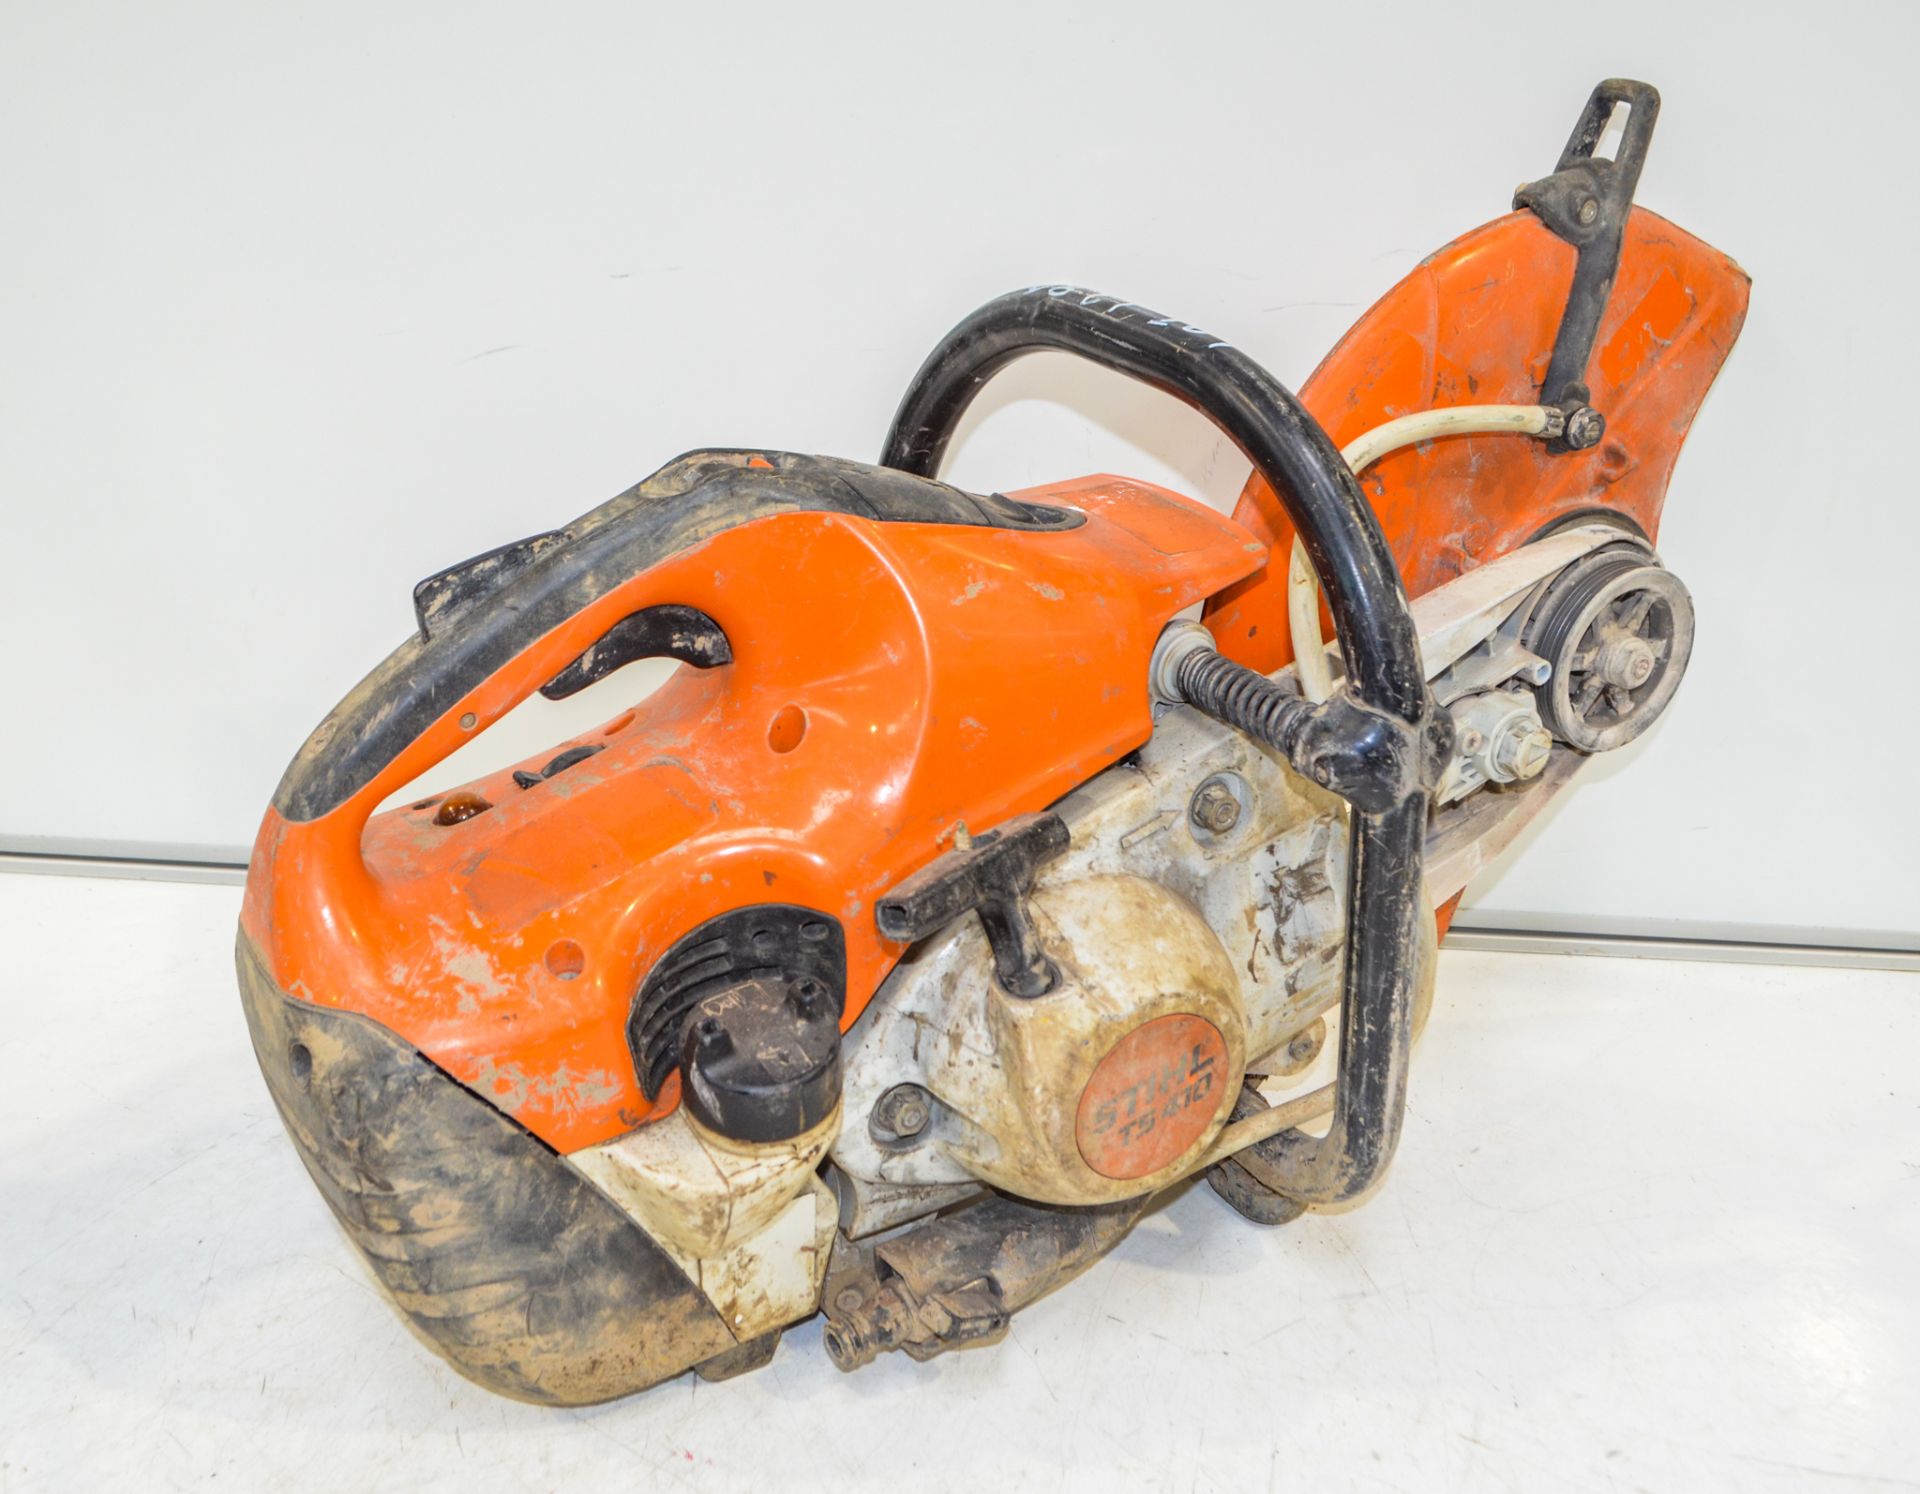 Stihl TS410 petrol driven cut off saw ** Exhaust, belt and cover missing ** - Image 2 of 2